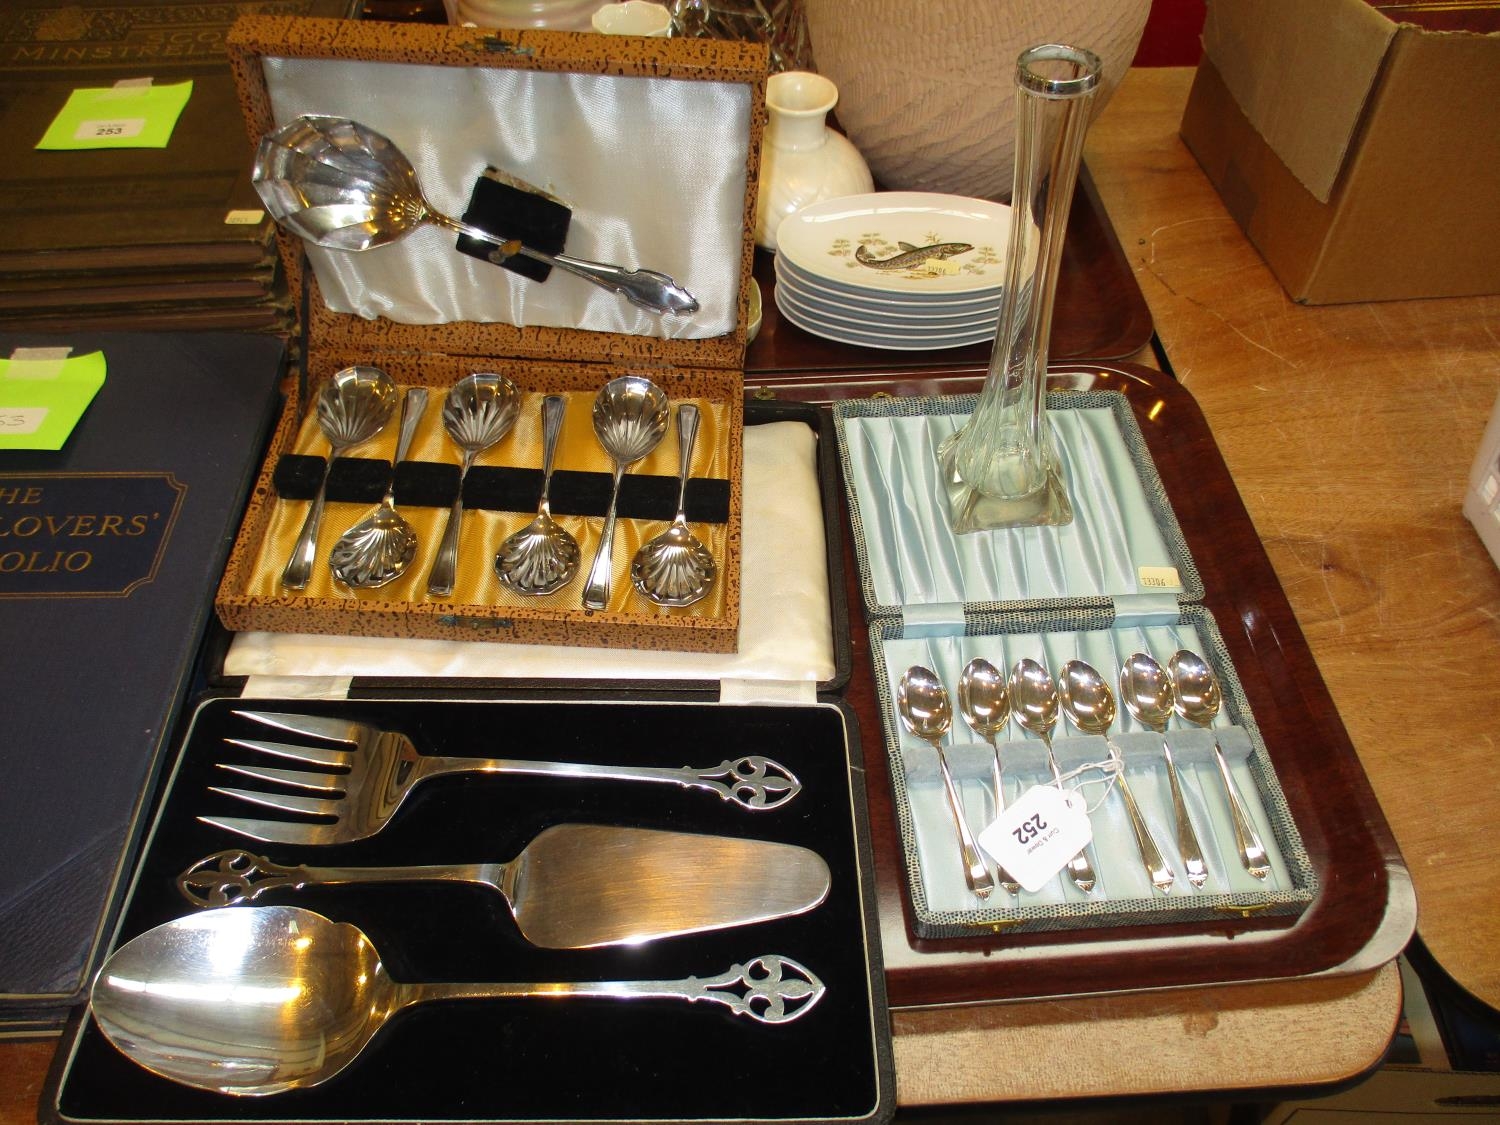 Cased Set of 6 Silver Teaspoons, Silver Mounted Glass Vase, Cased Spoons and Servers